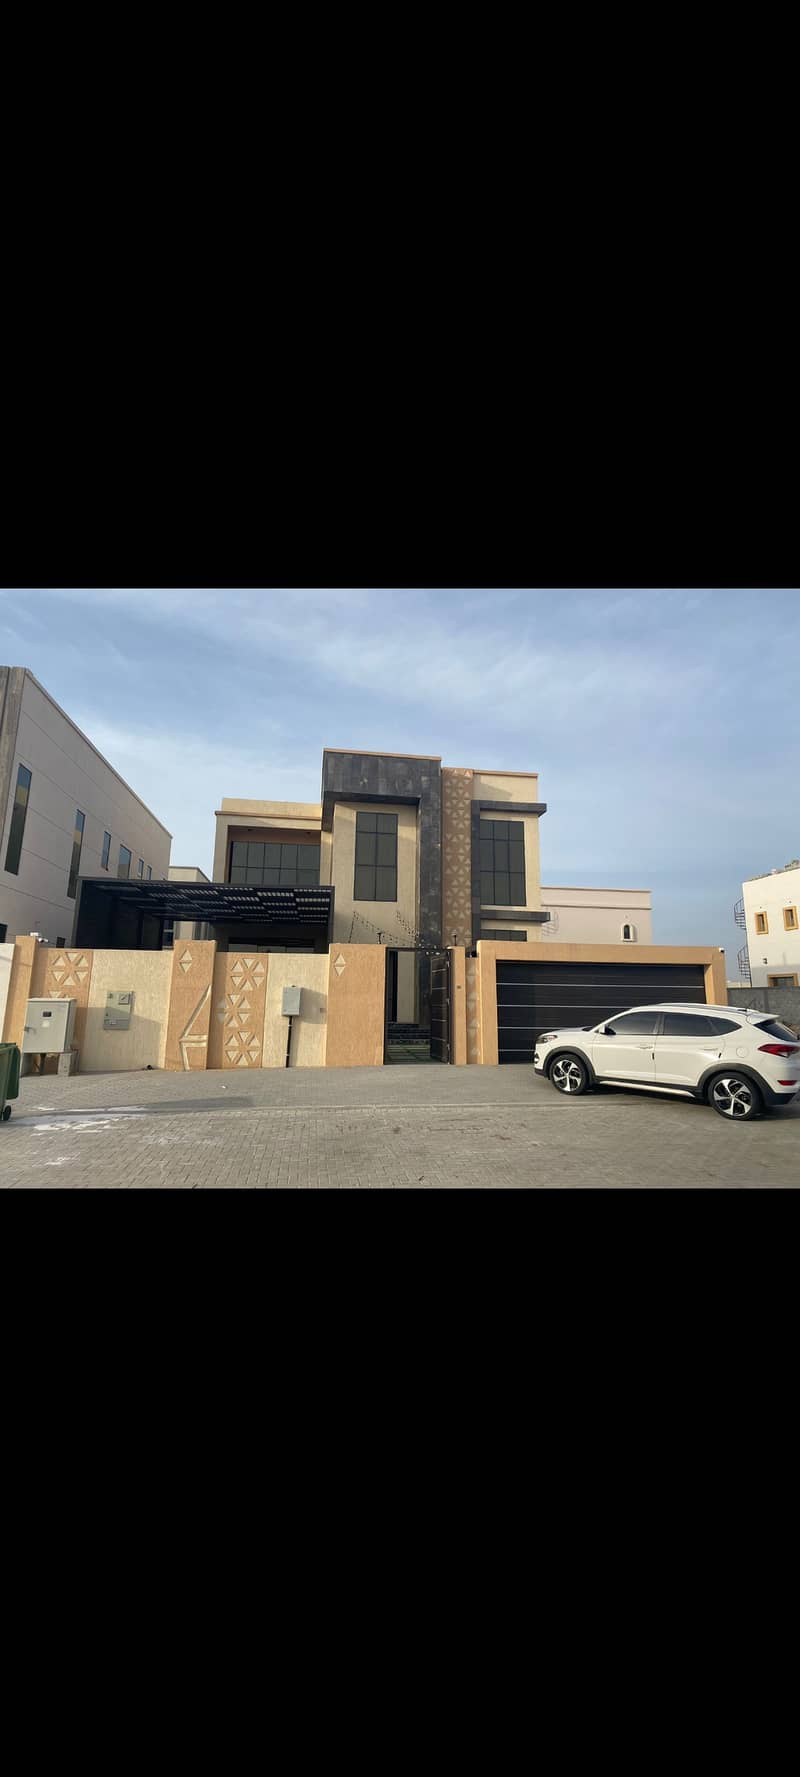 An opportunity for rent in the Emirate of Ajman
 Villa with annex + covered swimming pool
  The Aliya area is very close to Sheikh Mohammed bin Zayed Road
 Land area: 3,400 feet. Building area: 3,600 feet
 The villa consists of two floors + an annex
 grou